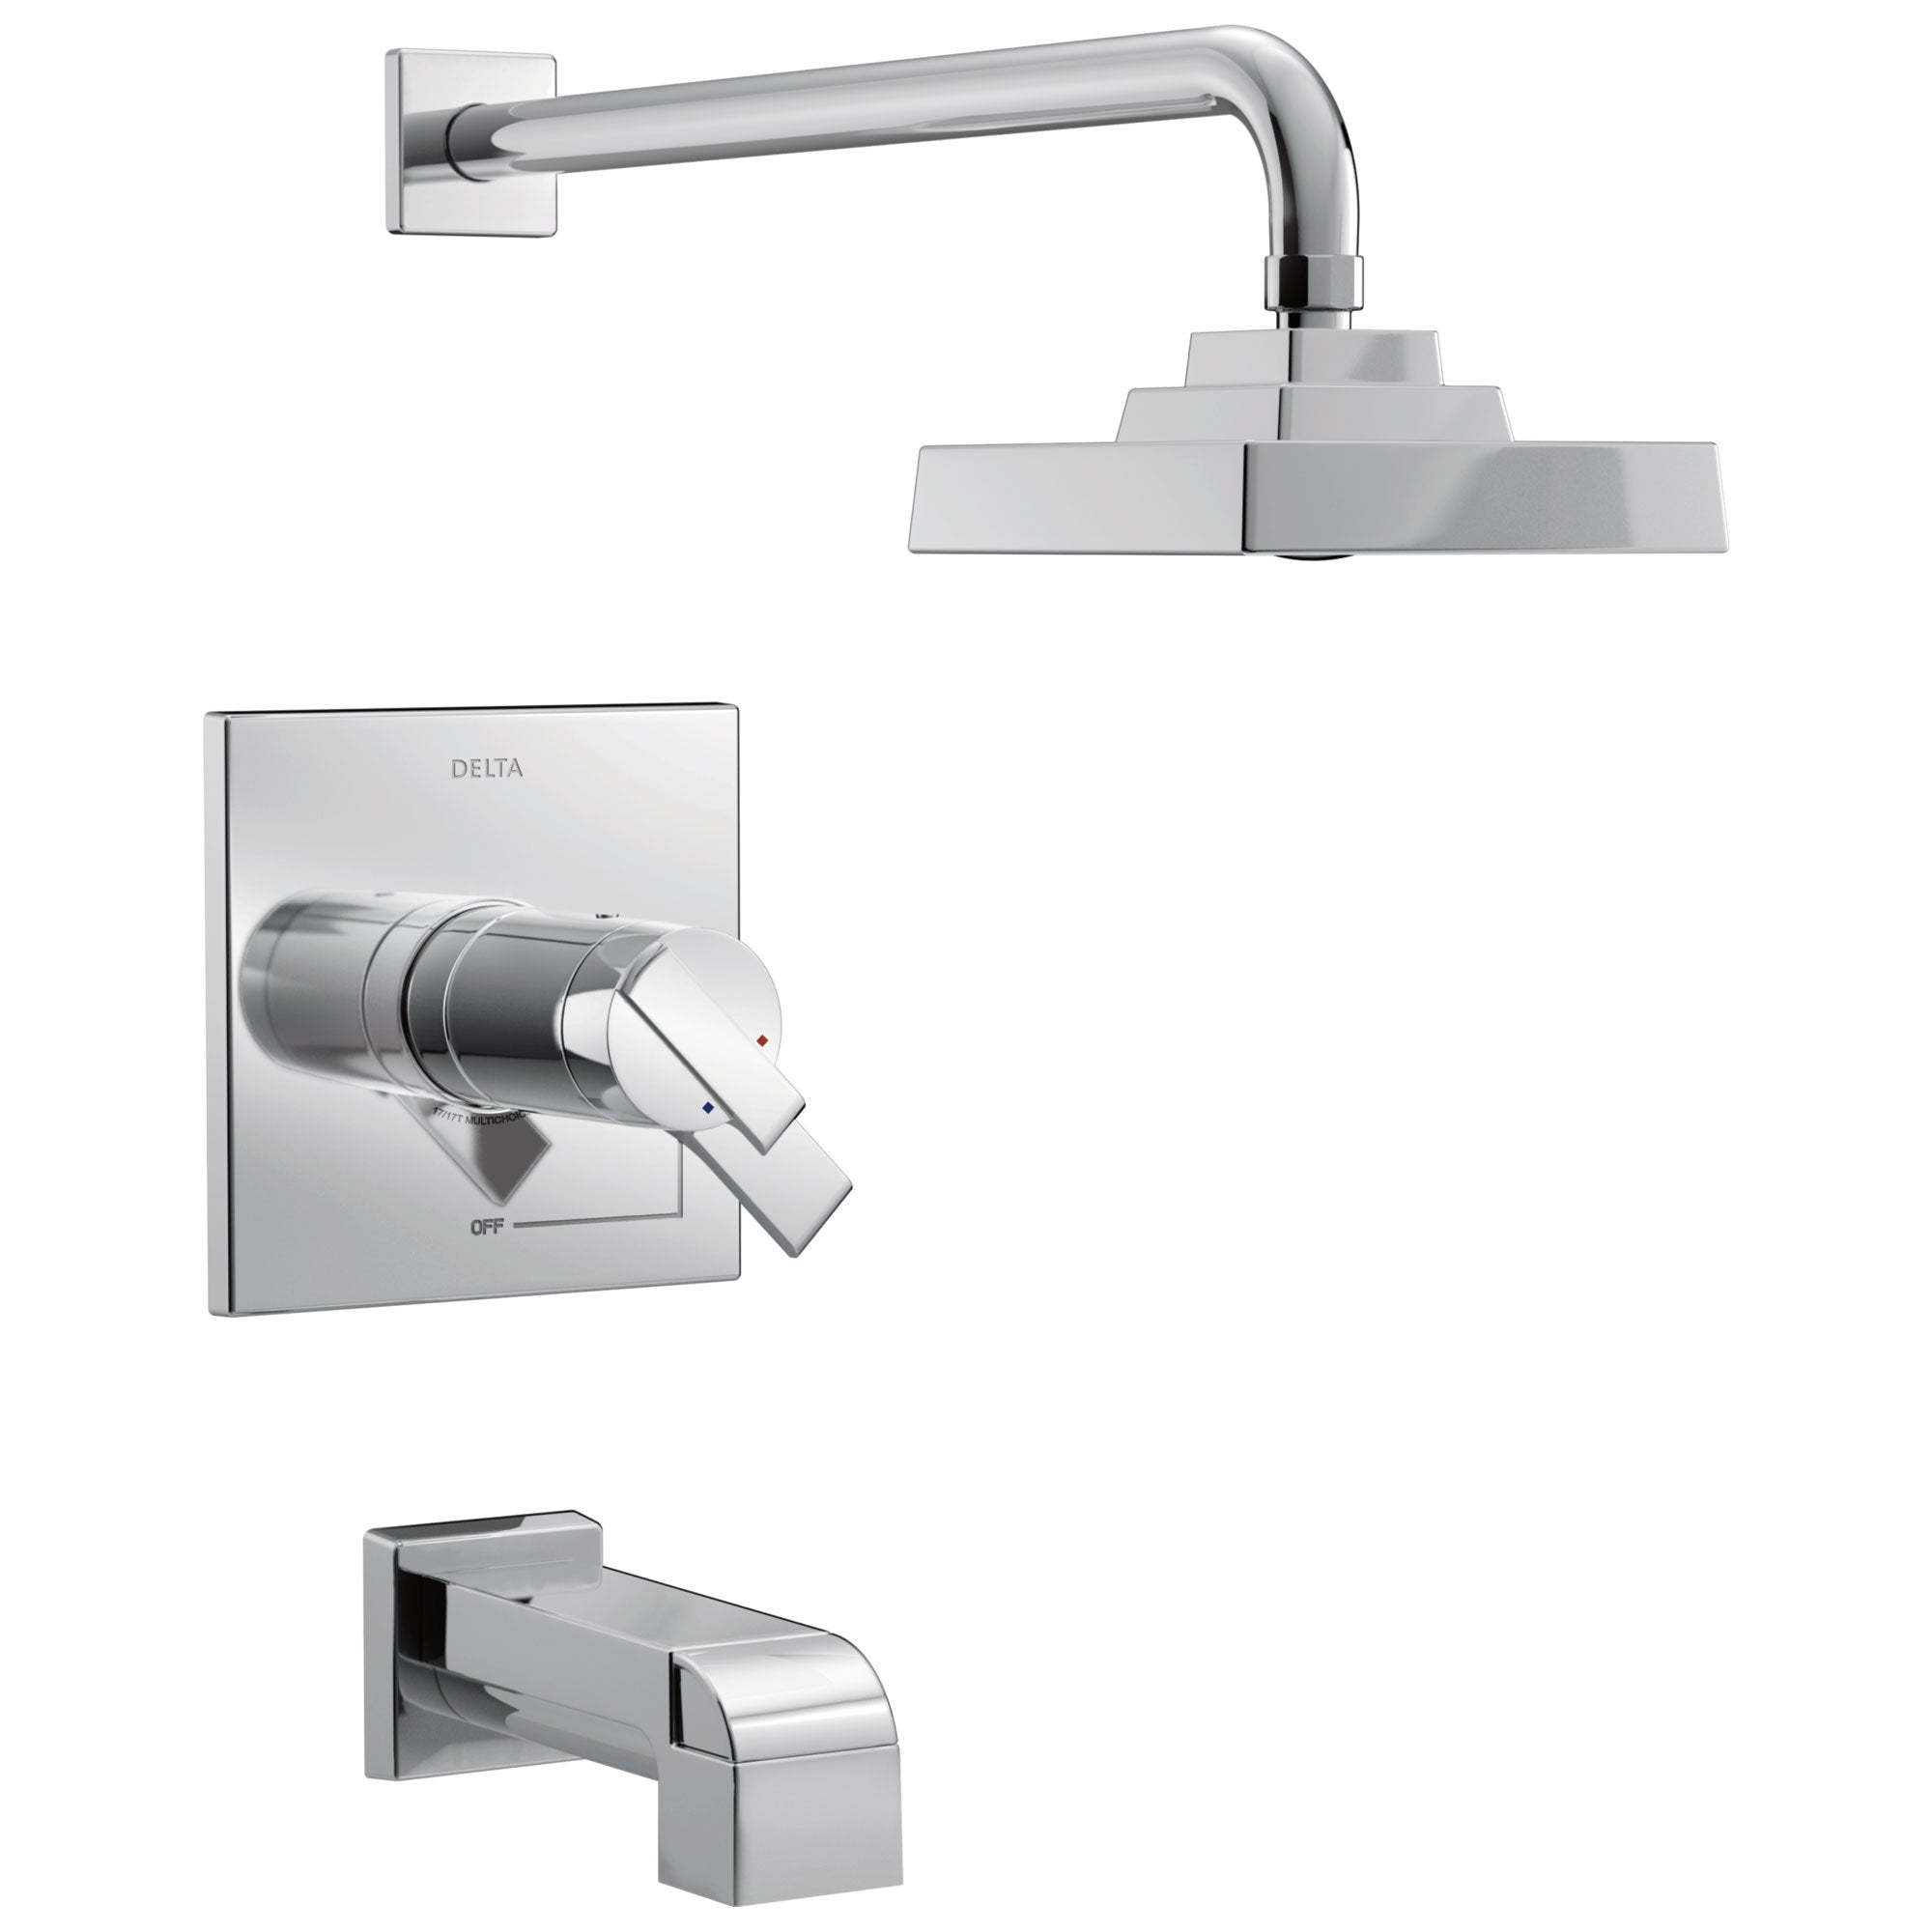 Delta Ara Collection Chrome Modern Thermostatic TempAssure 17T Series Tub and Shower Combination Faucet Includes Valve without Stops D2223V